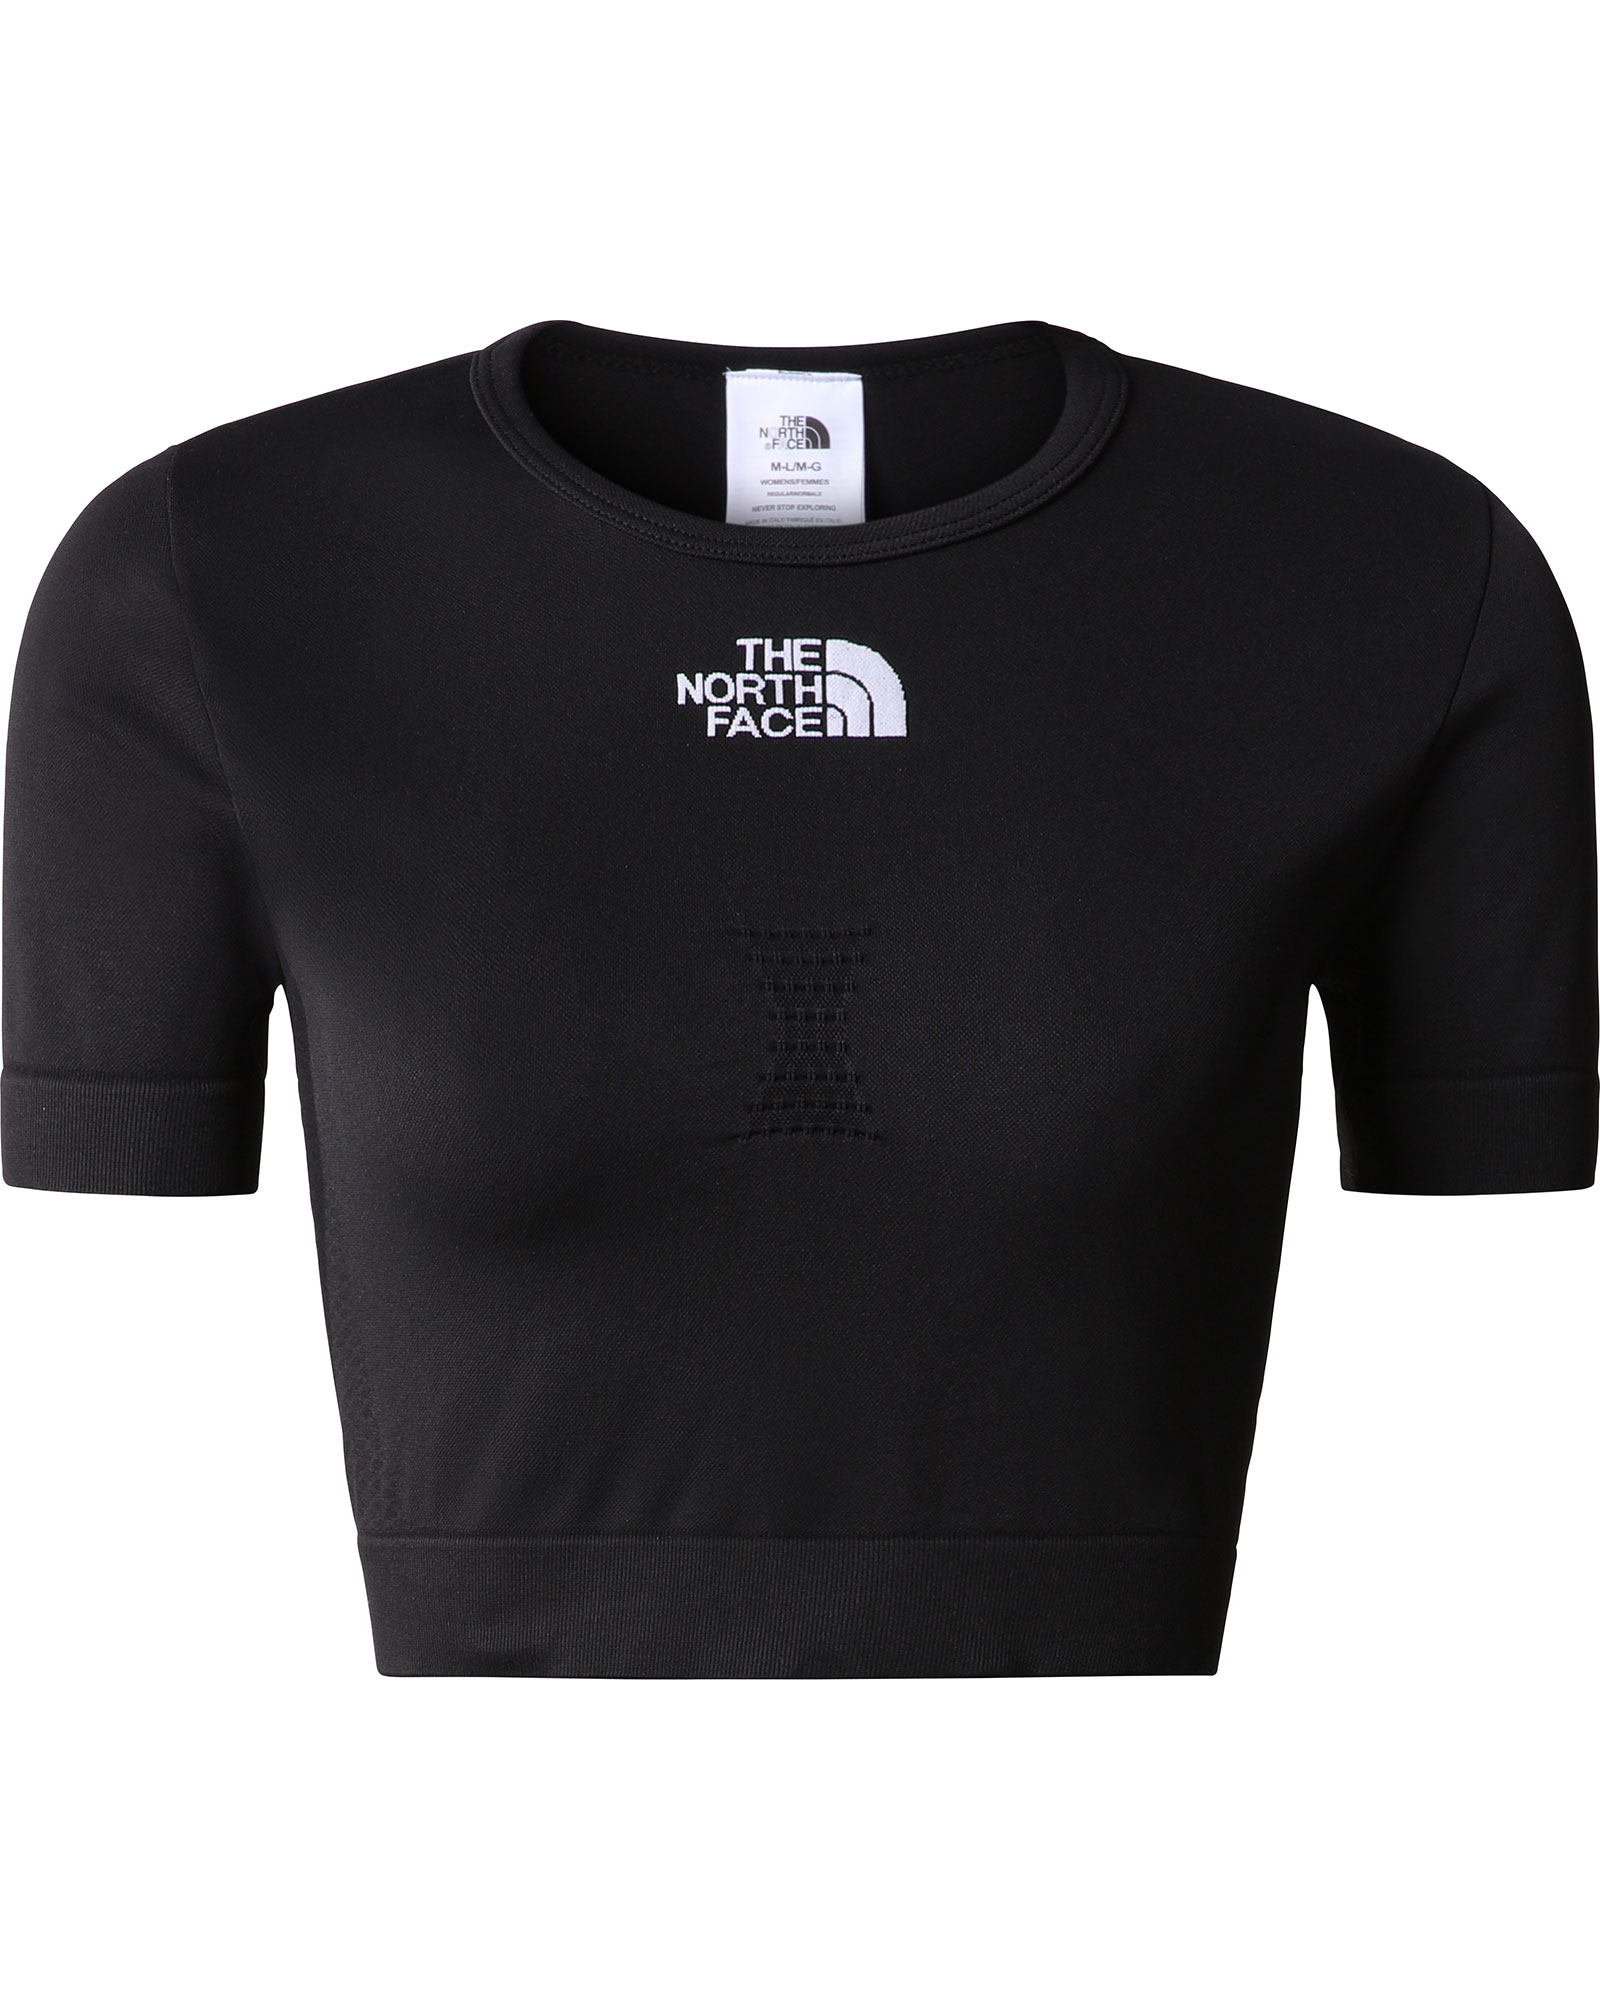 The North Face Women’s New Seamless T Shirt - TNF Black XS/S